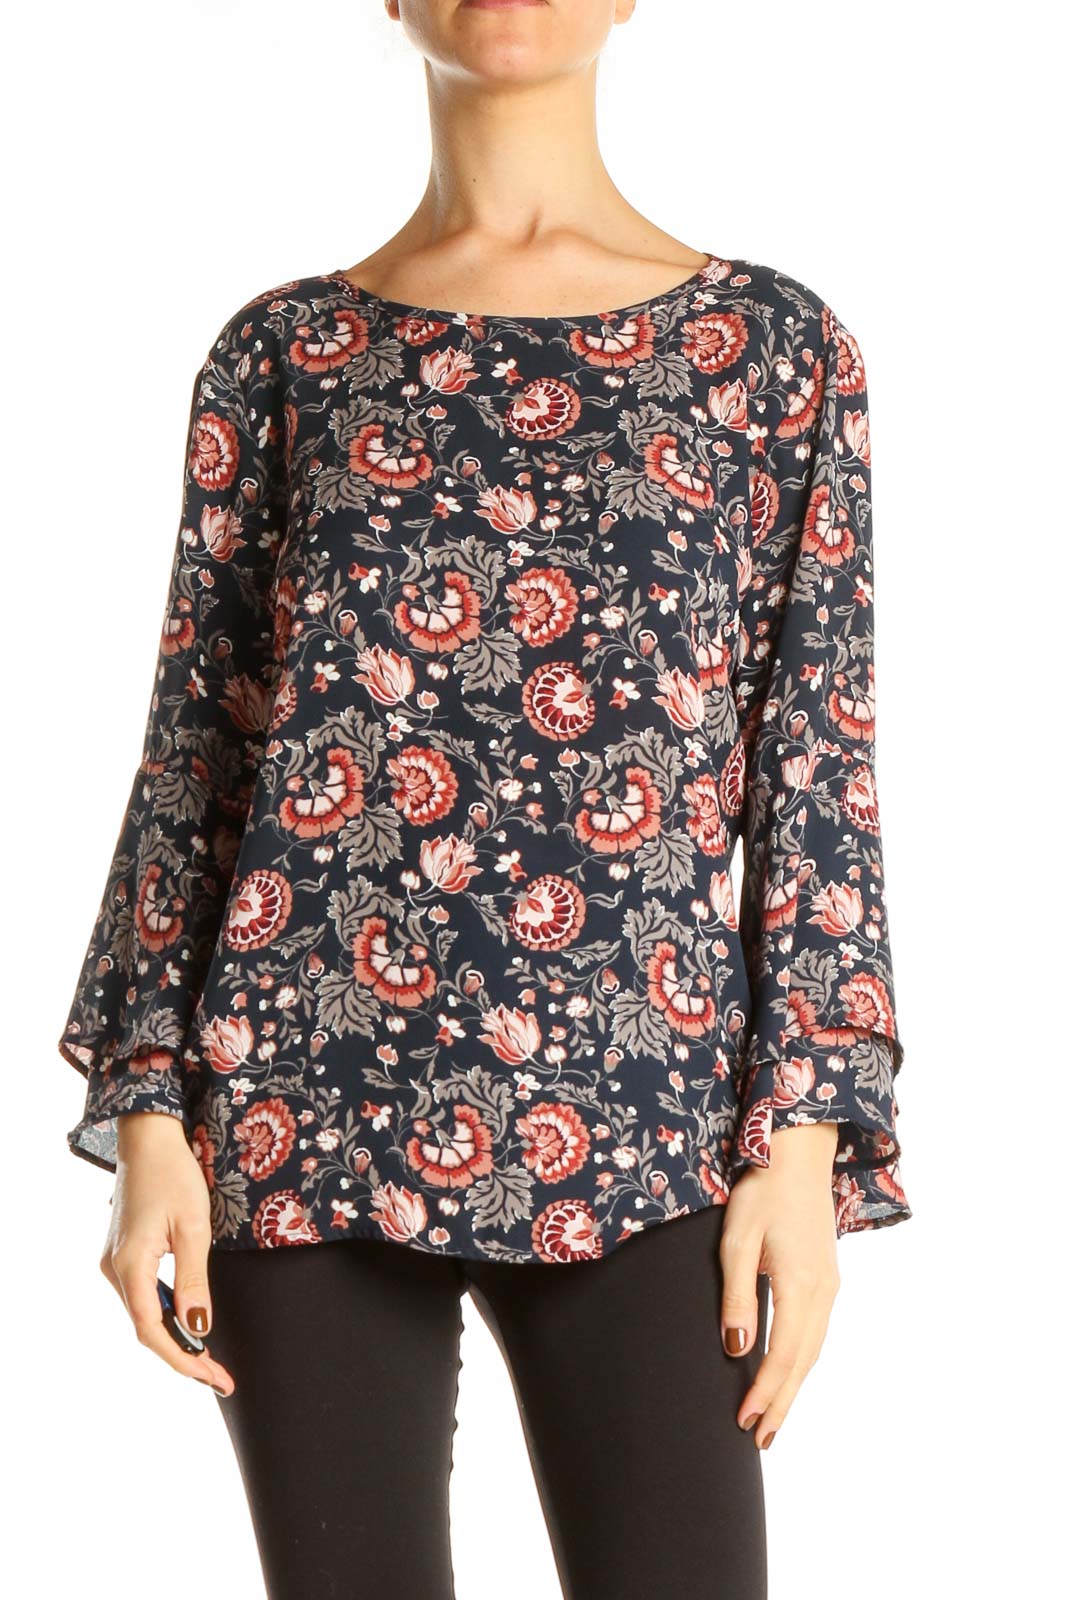 Blue Pink Floral Print Casual Top Front